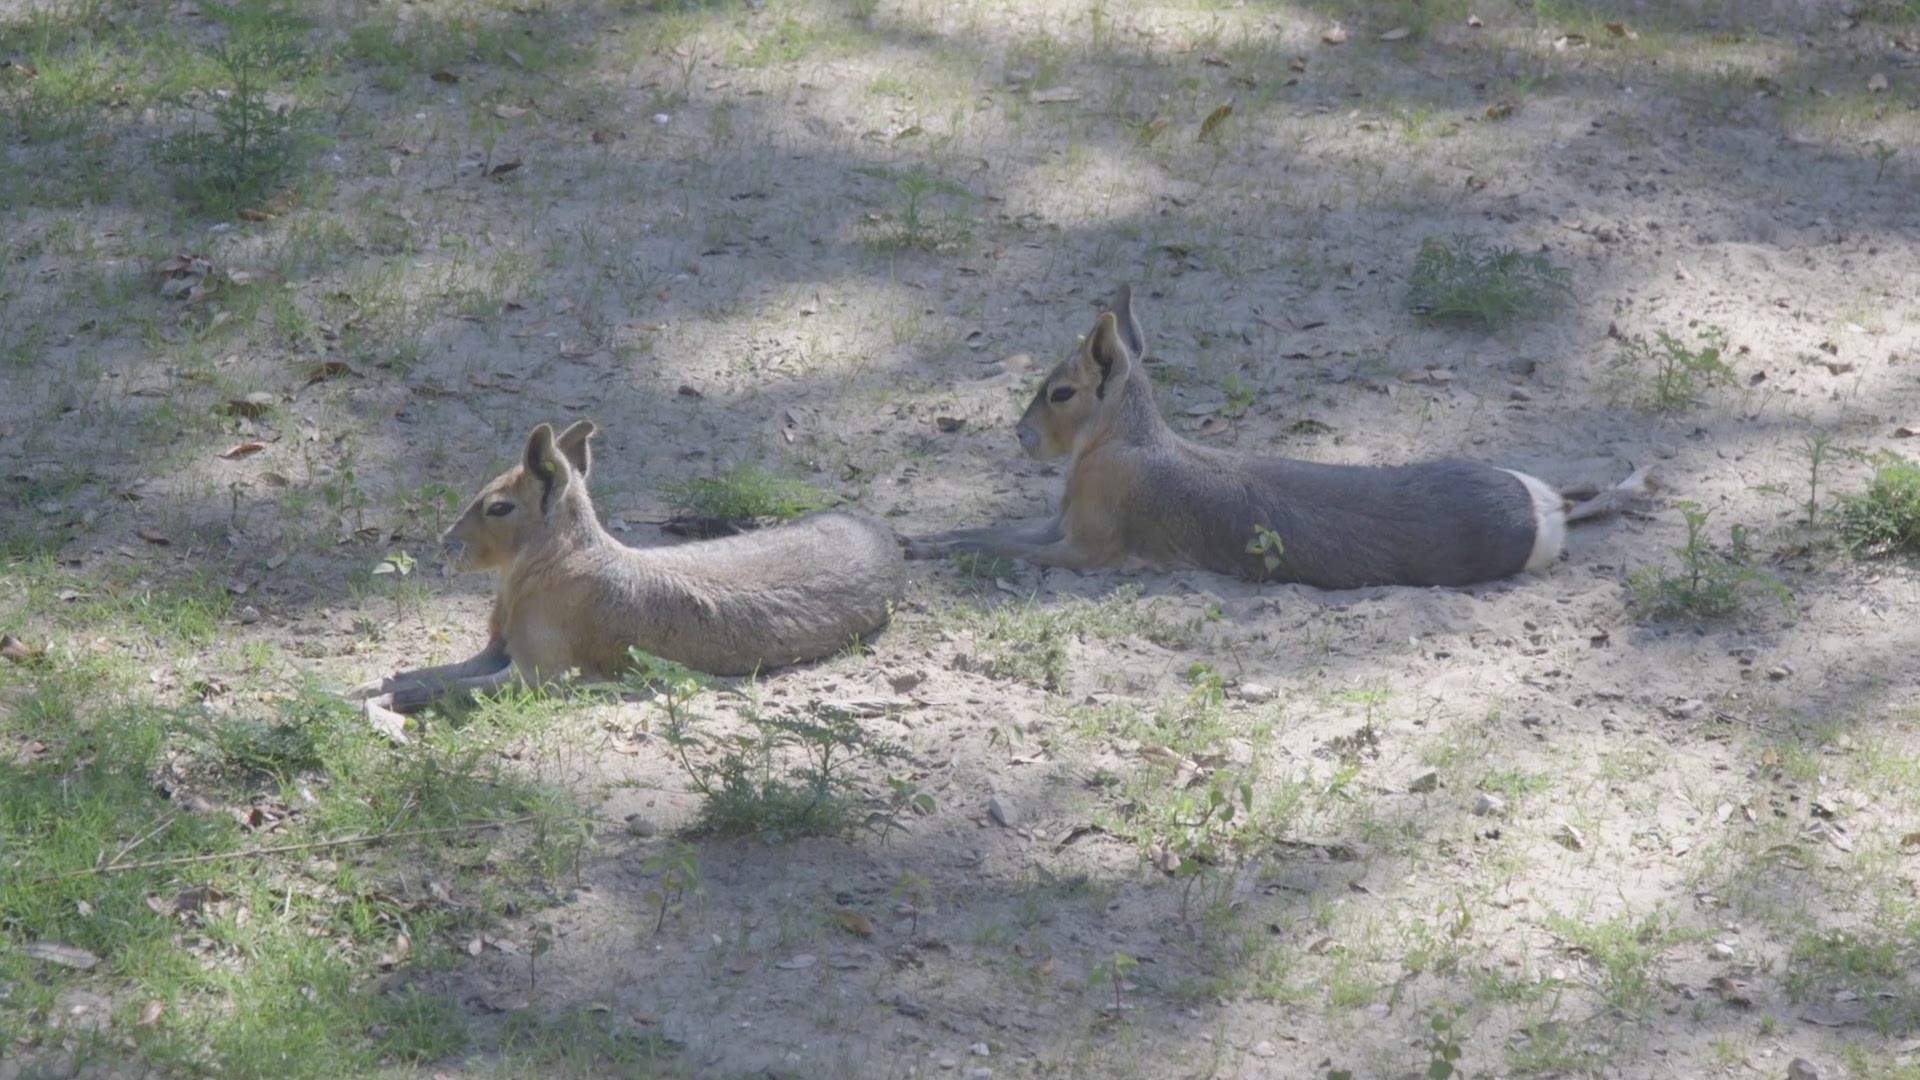 Audubon Zoo recently welcomed a trio of young Patagonian cavies - one of the largest species of rodent in the world - to the South America habitat near the new Jaguar Jungle exhibit expansion.